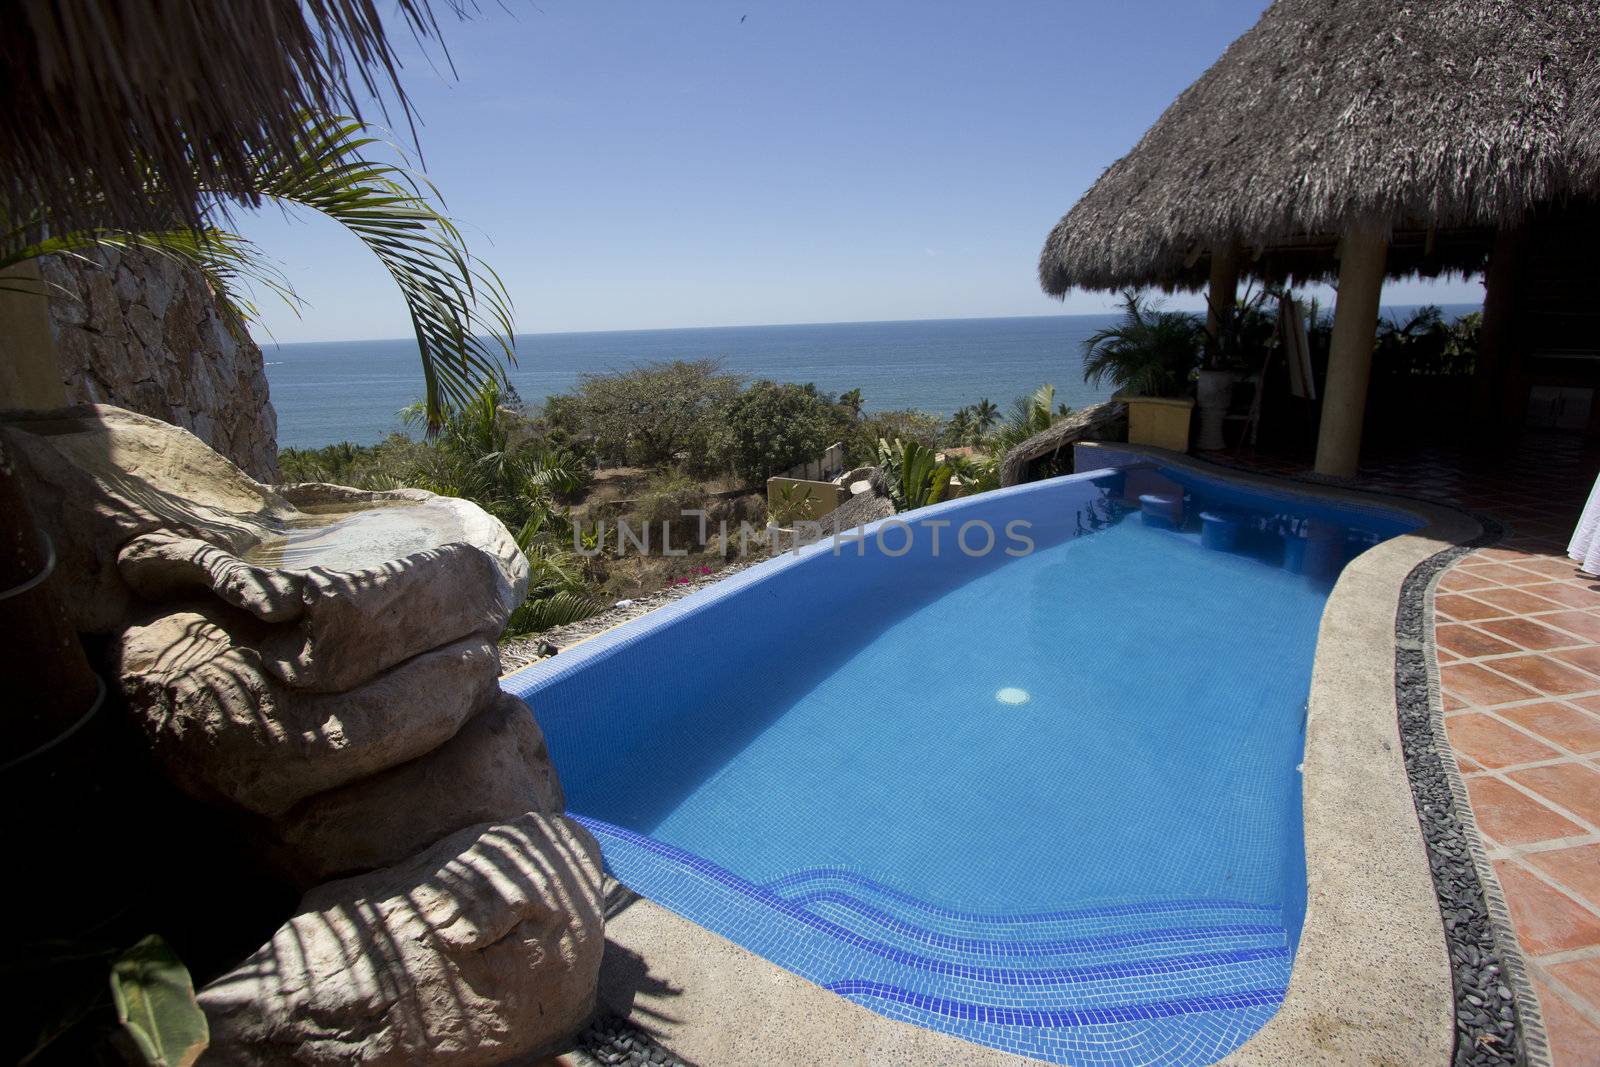 Mexican villa with beach view and a swimming pool.